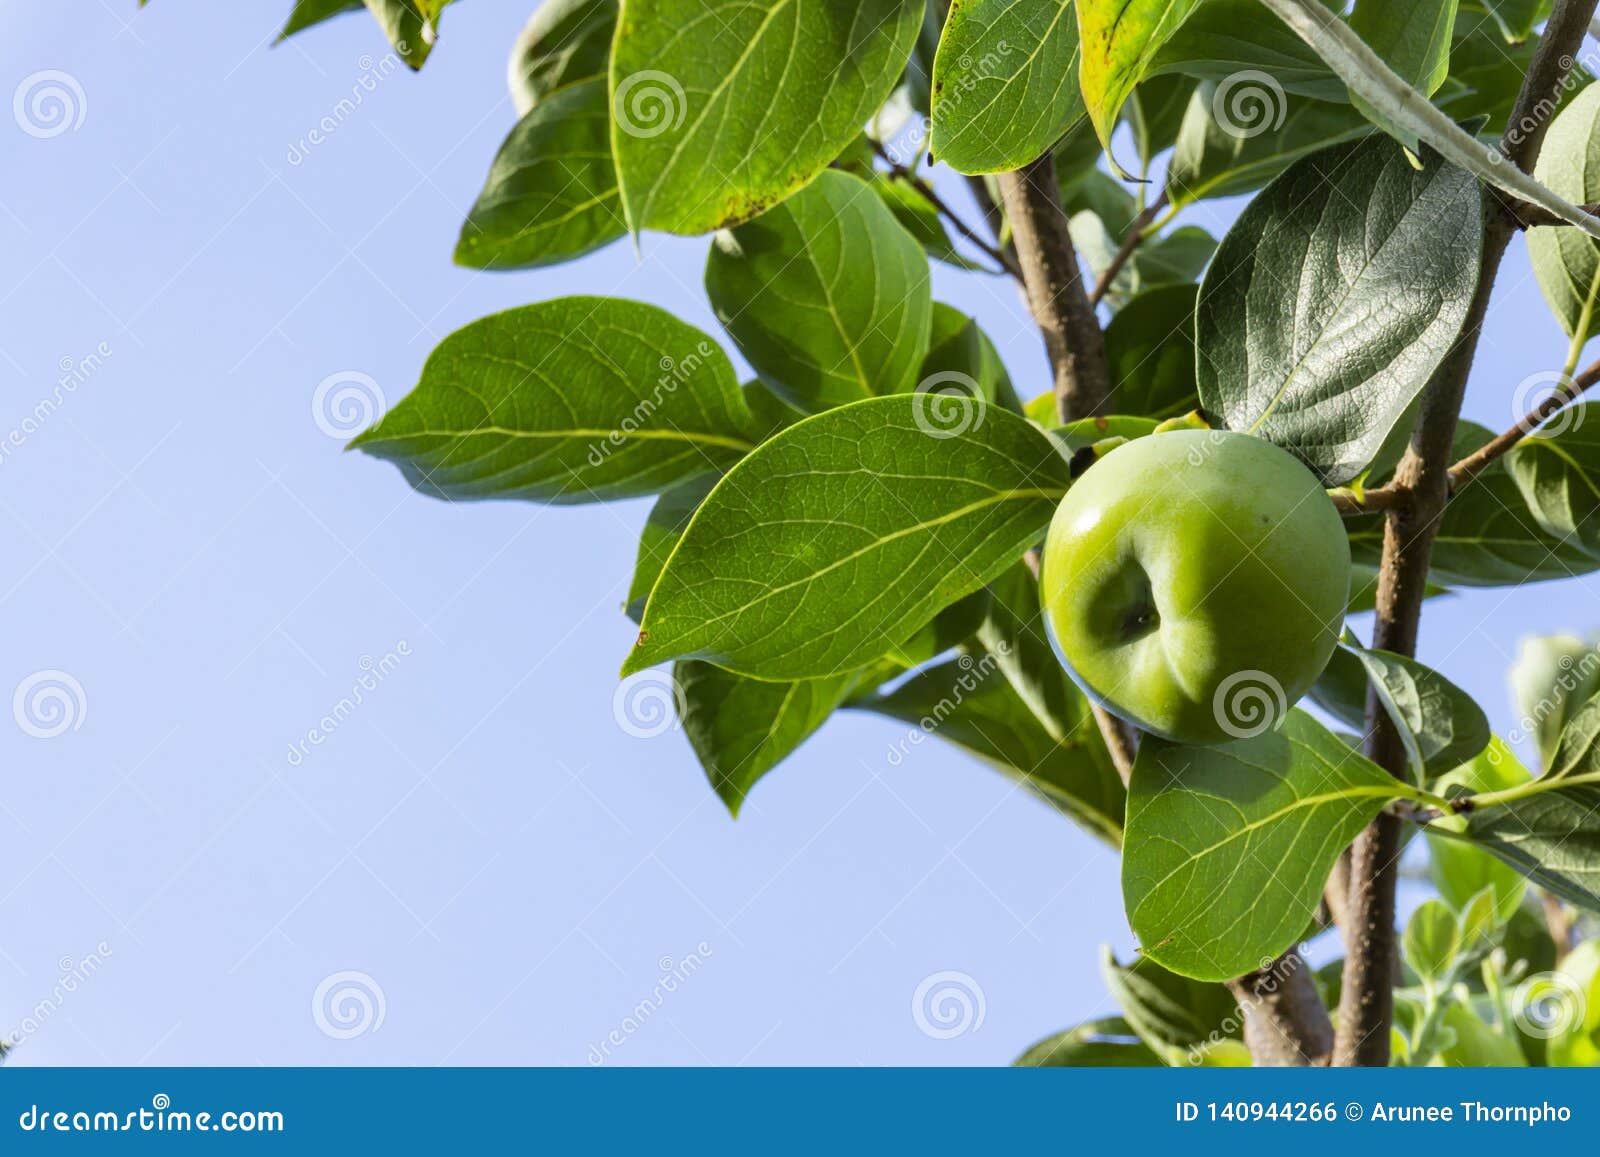 upward view, bunch of green raw persimmon round fruits and green leaves under blue sky, kown as diospyros fruit,edible plants